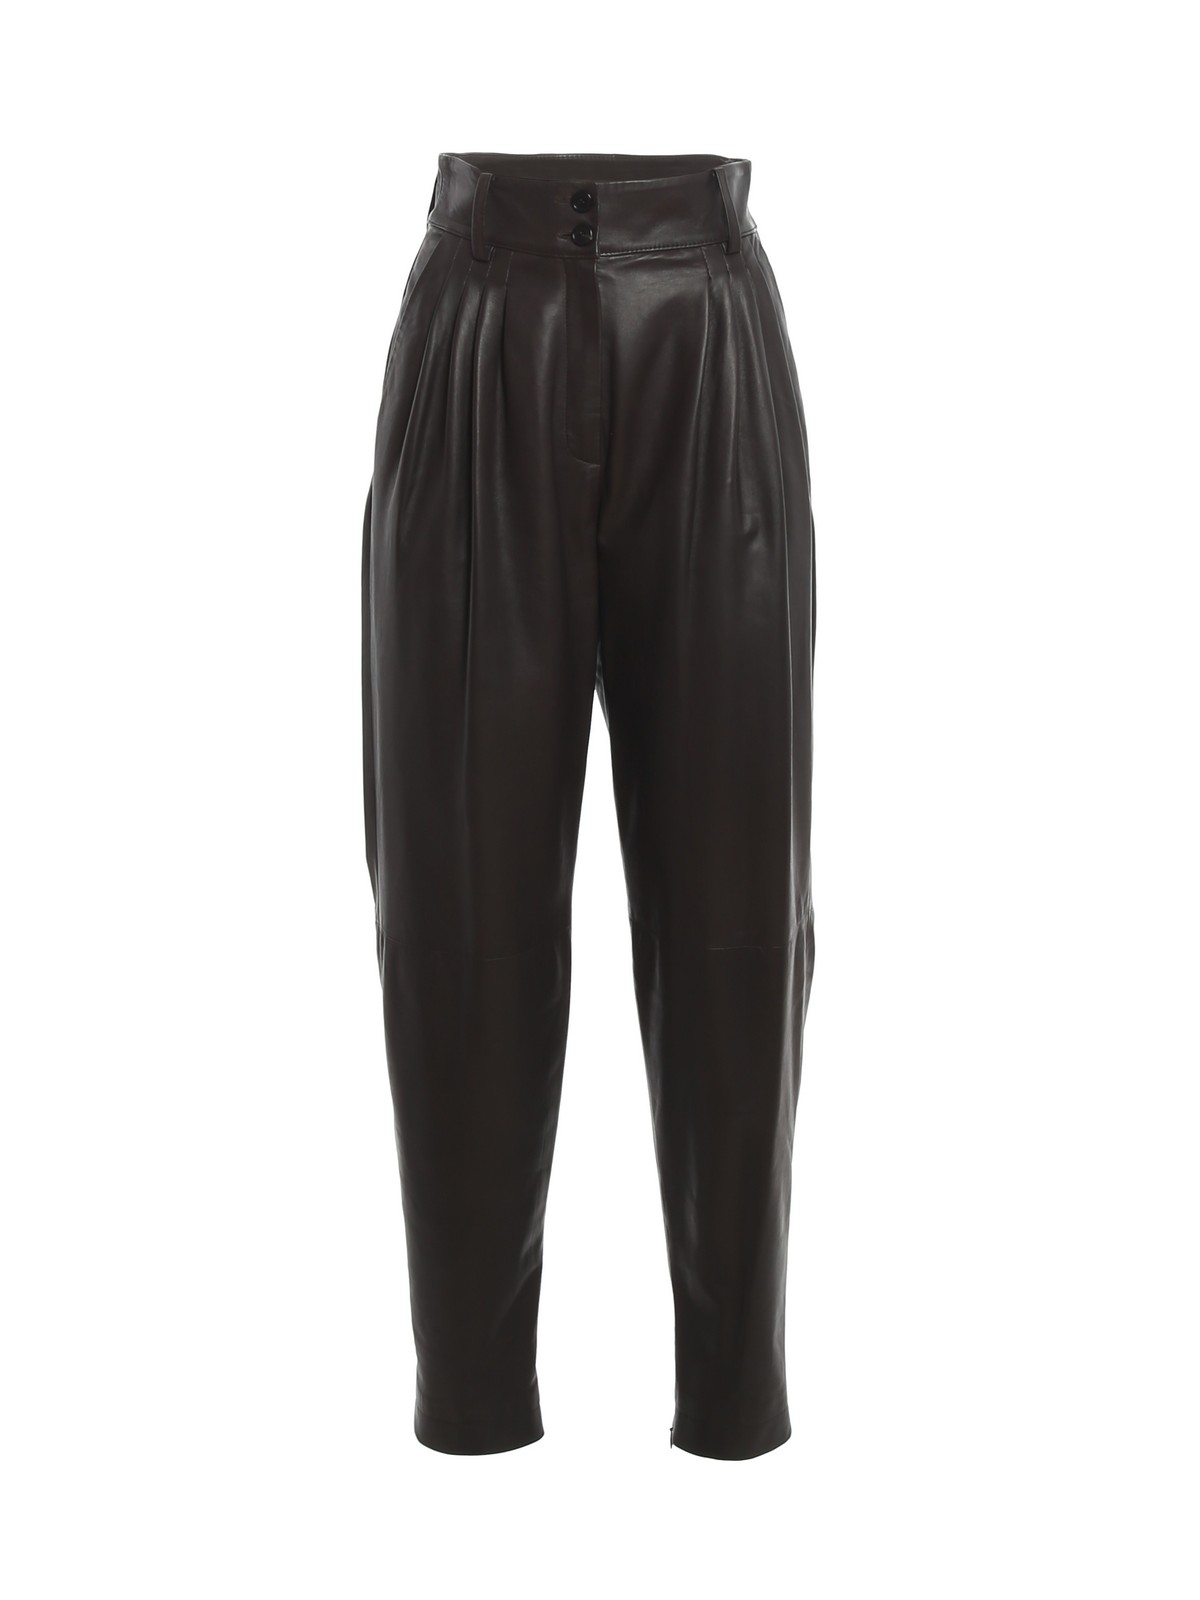 Leather trousers Dolce & Gabbana - Leather pants - FTBYDLHULJ7M1348